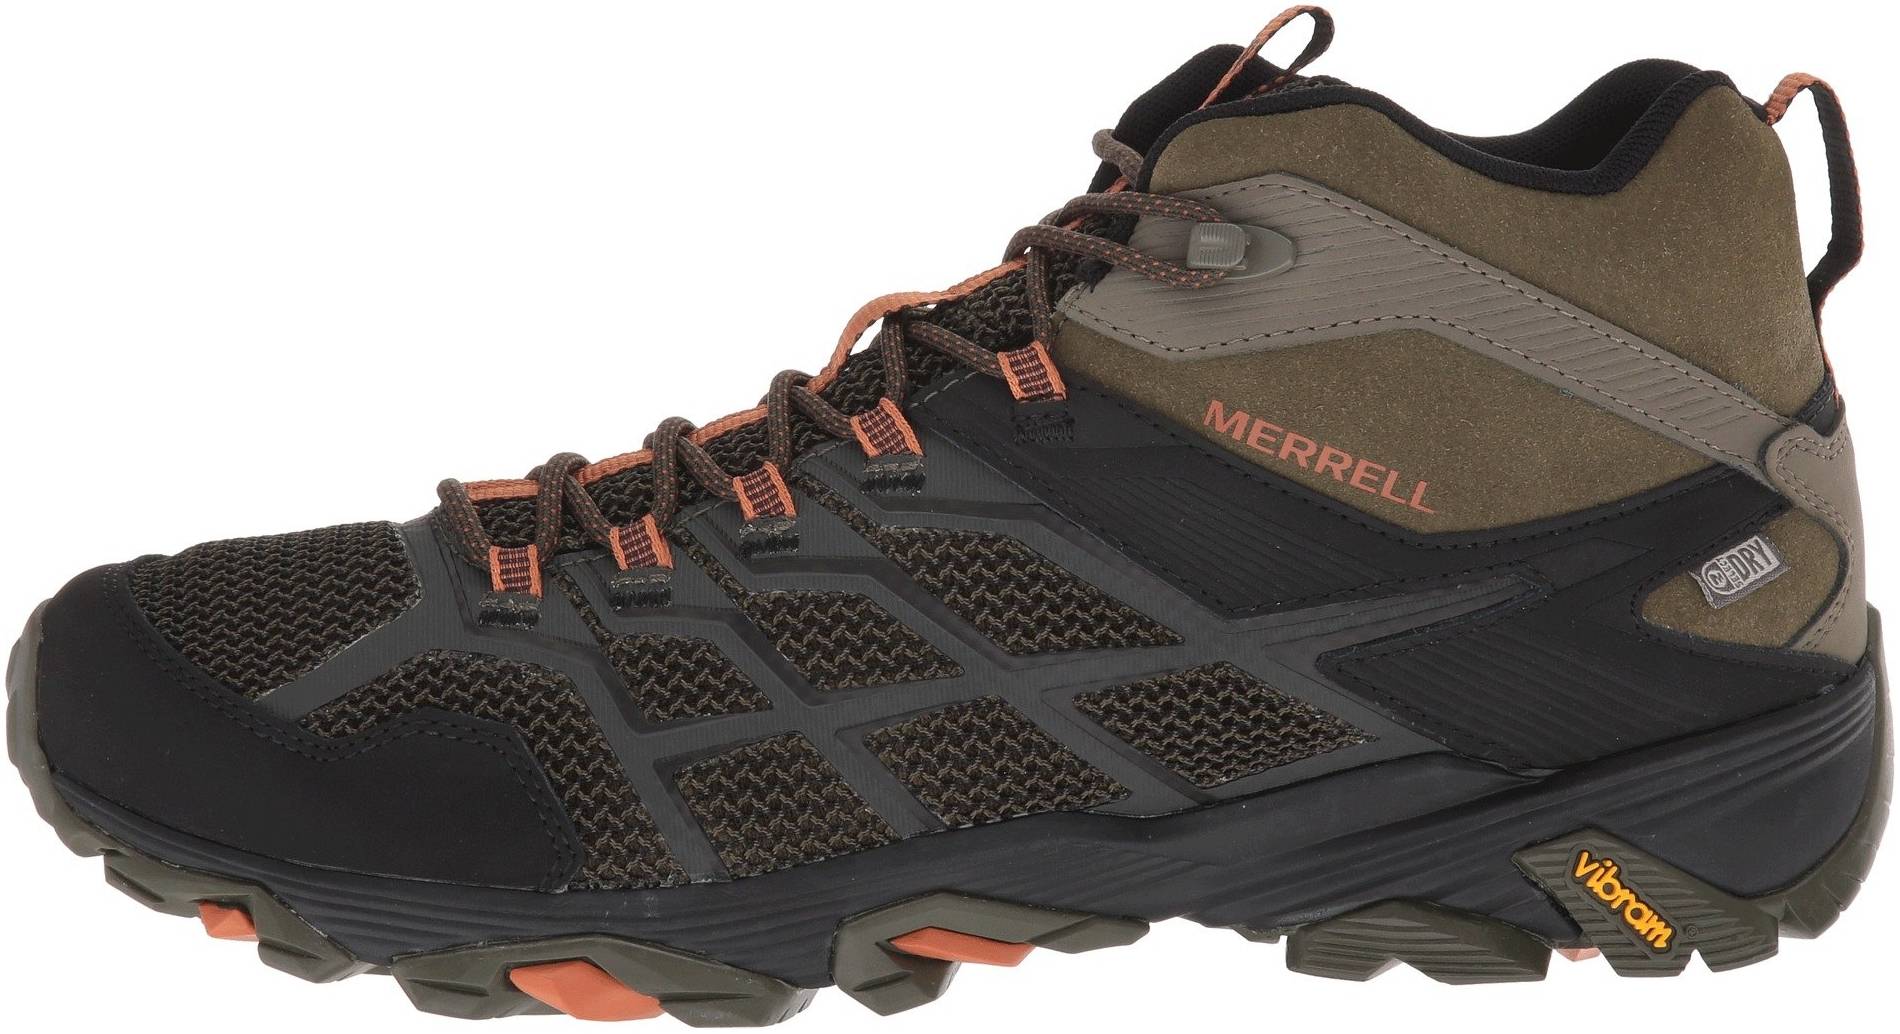 8 Reasons To Not To Buy Merrell Moab Fst 2 Mid Waterproof May 21 Runrepeat